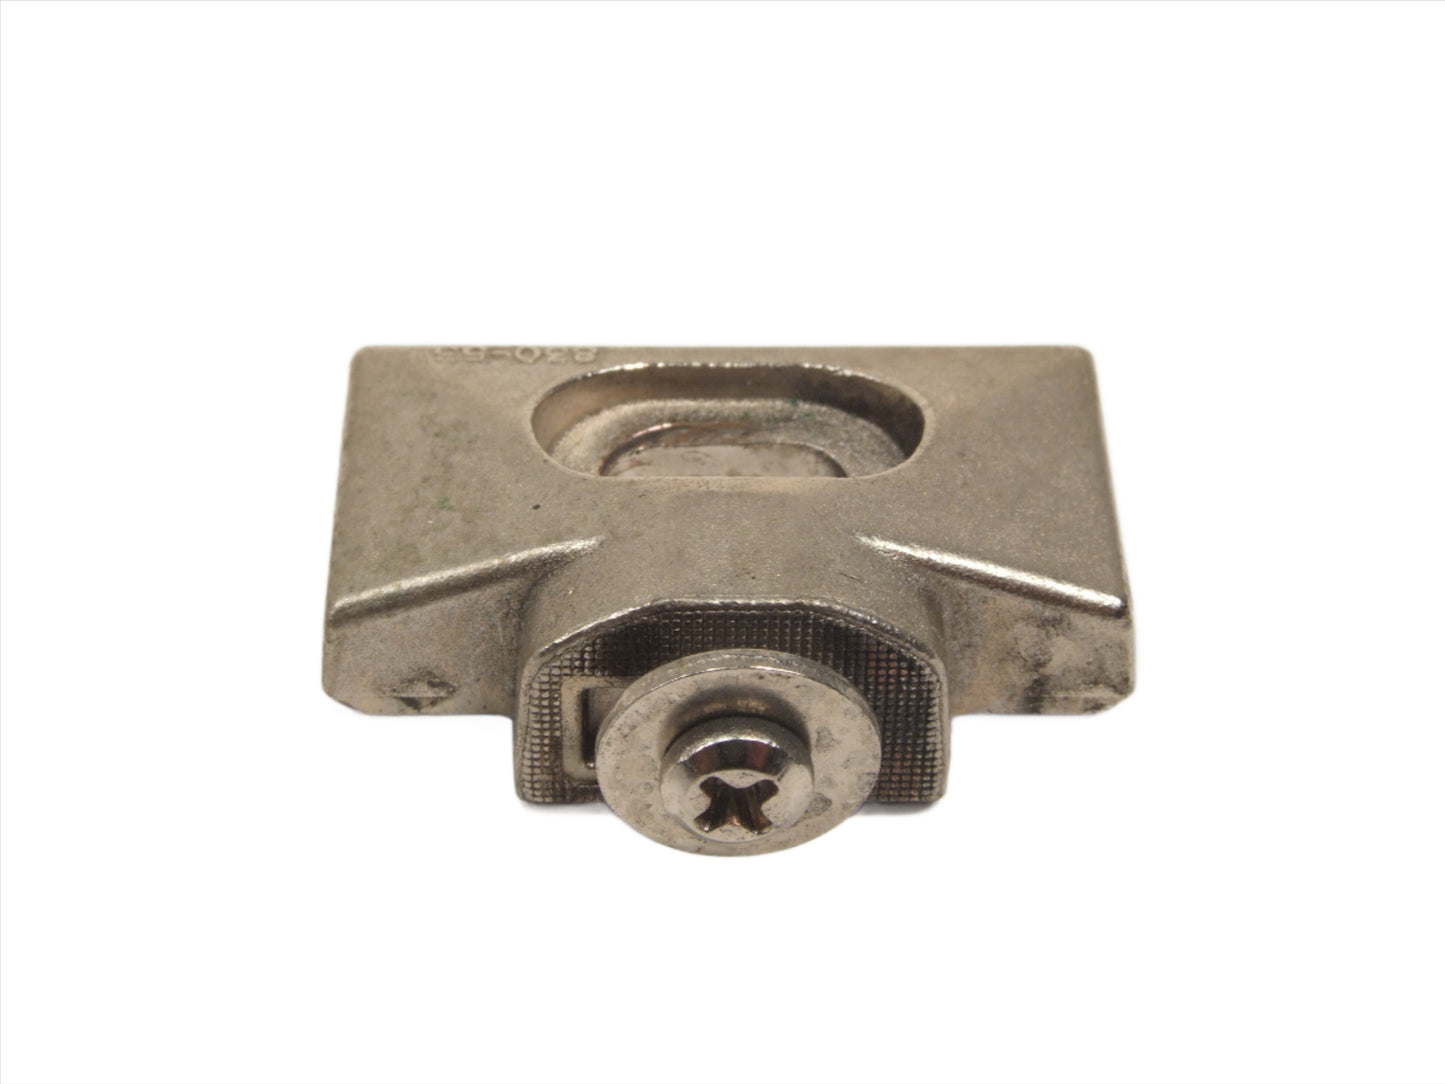 Grass 830-53 Nickel Mounting Plate a replacement for 830-37